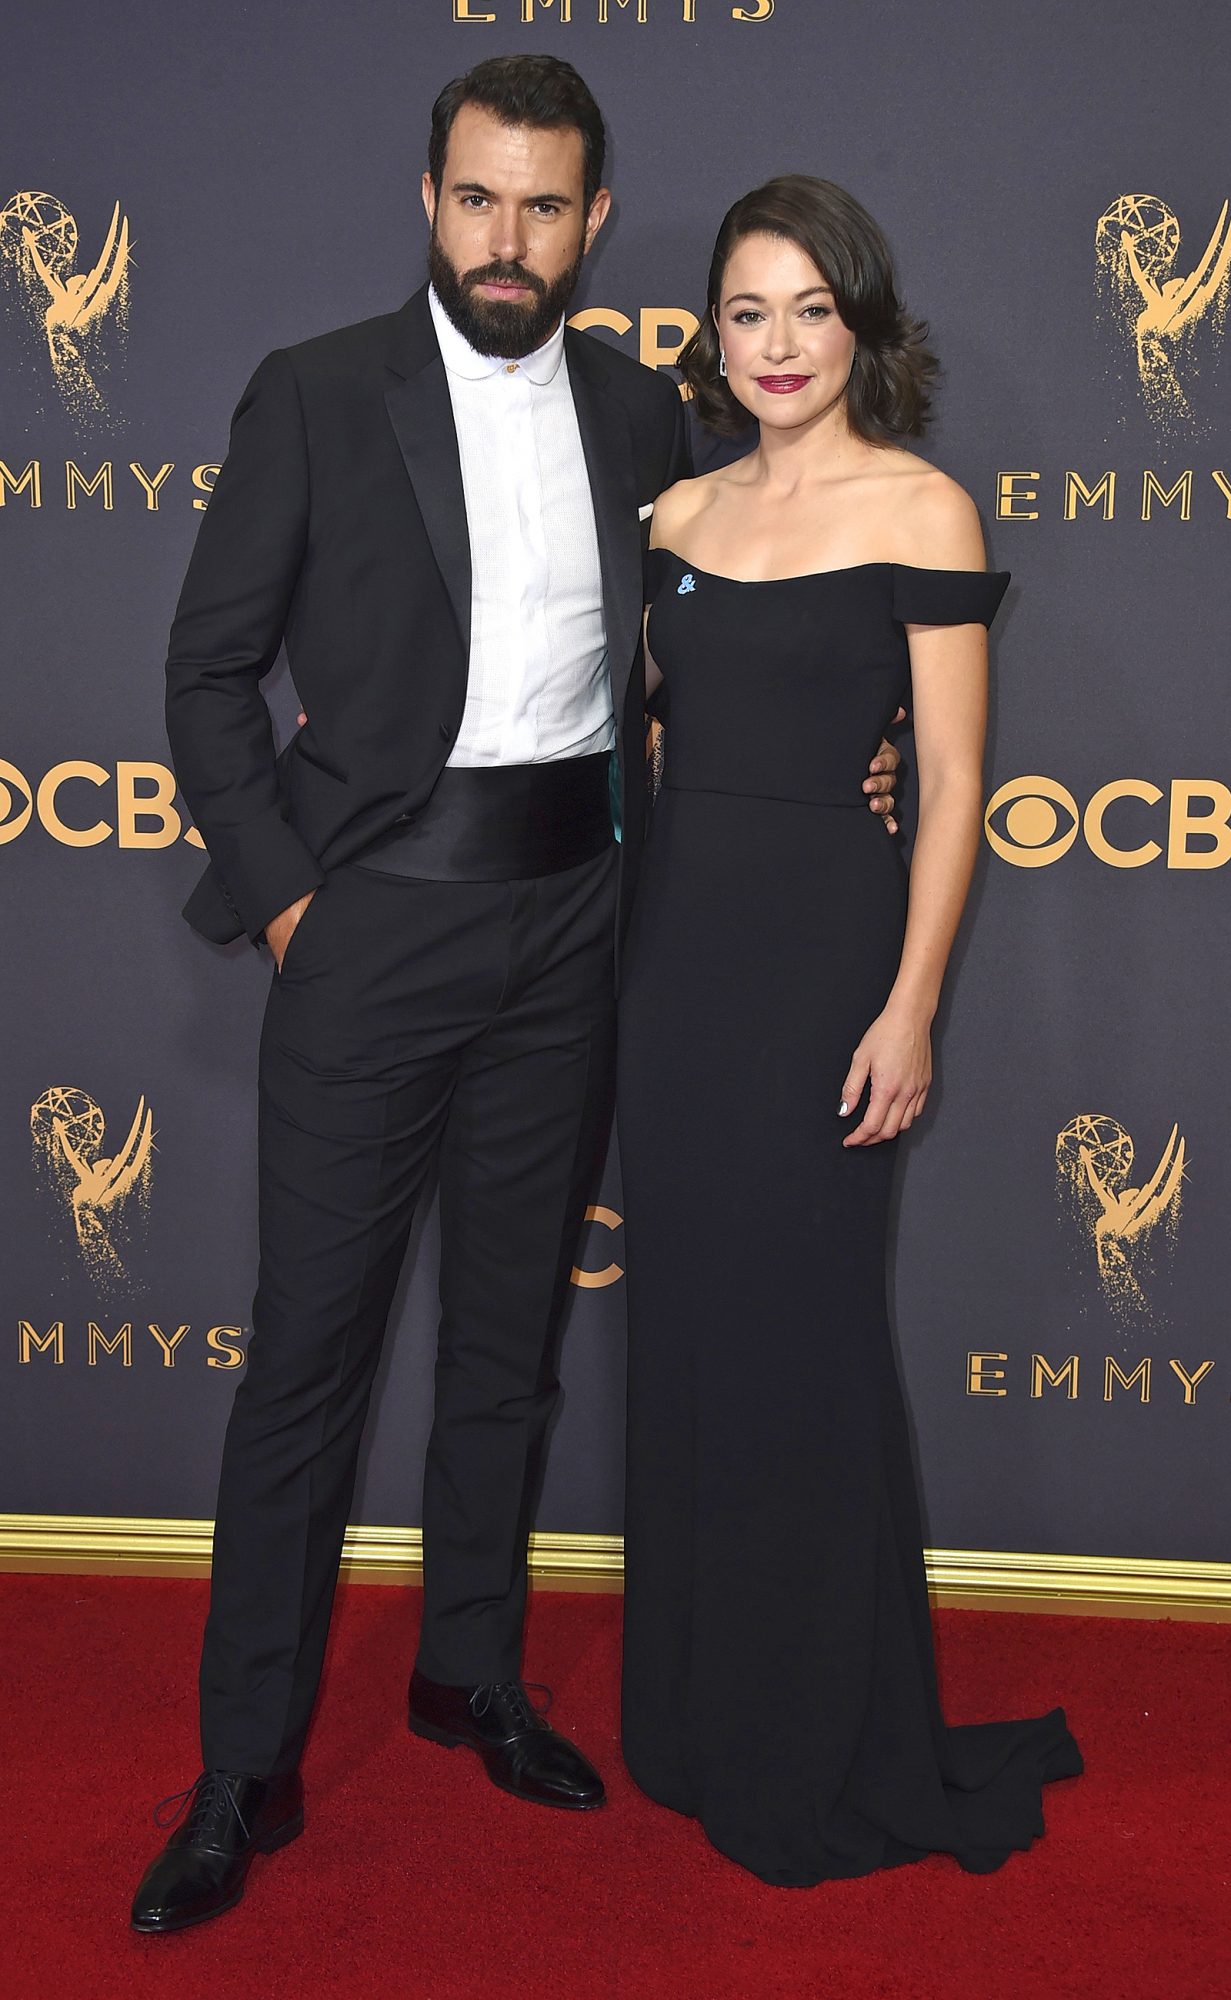 Tatiana Maslany with her ex-boyfriend, Tom Cullen, at the Emmys